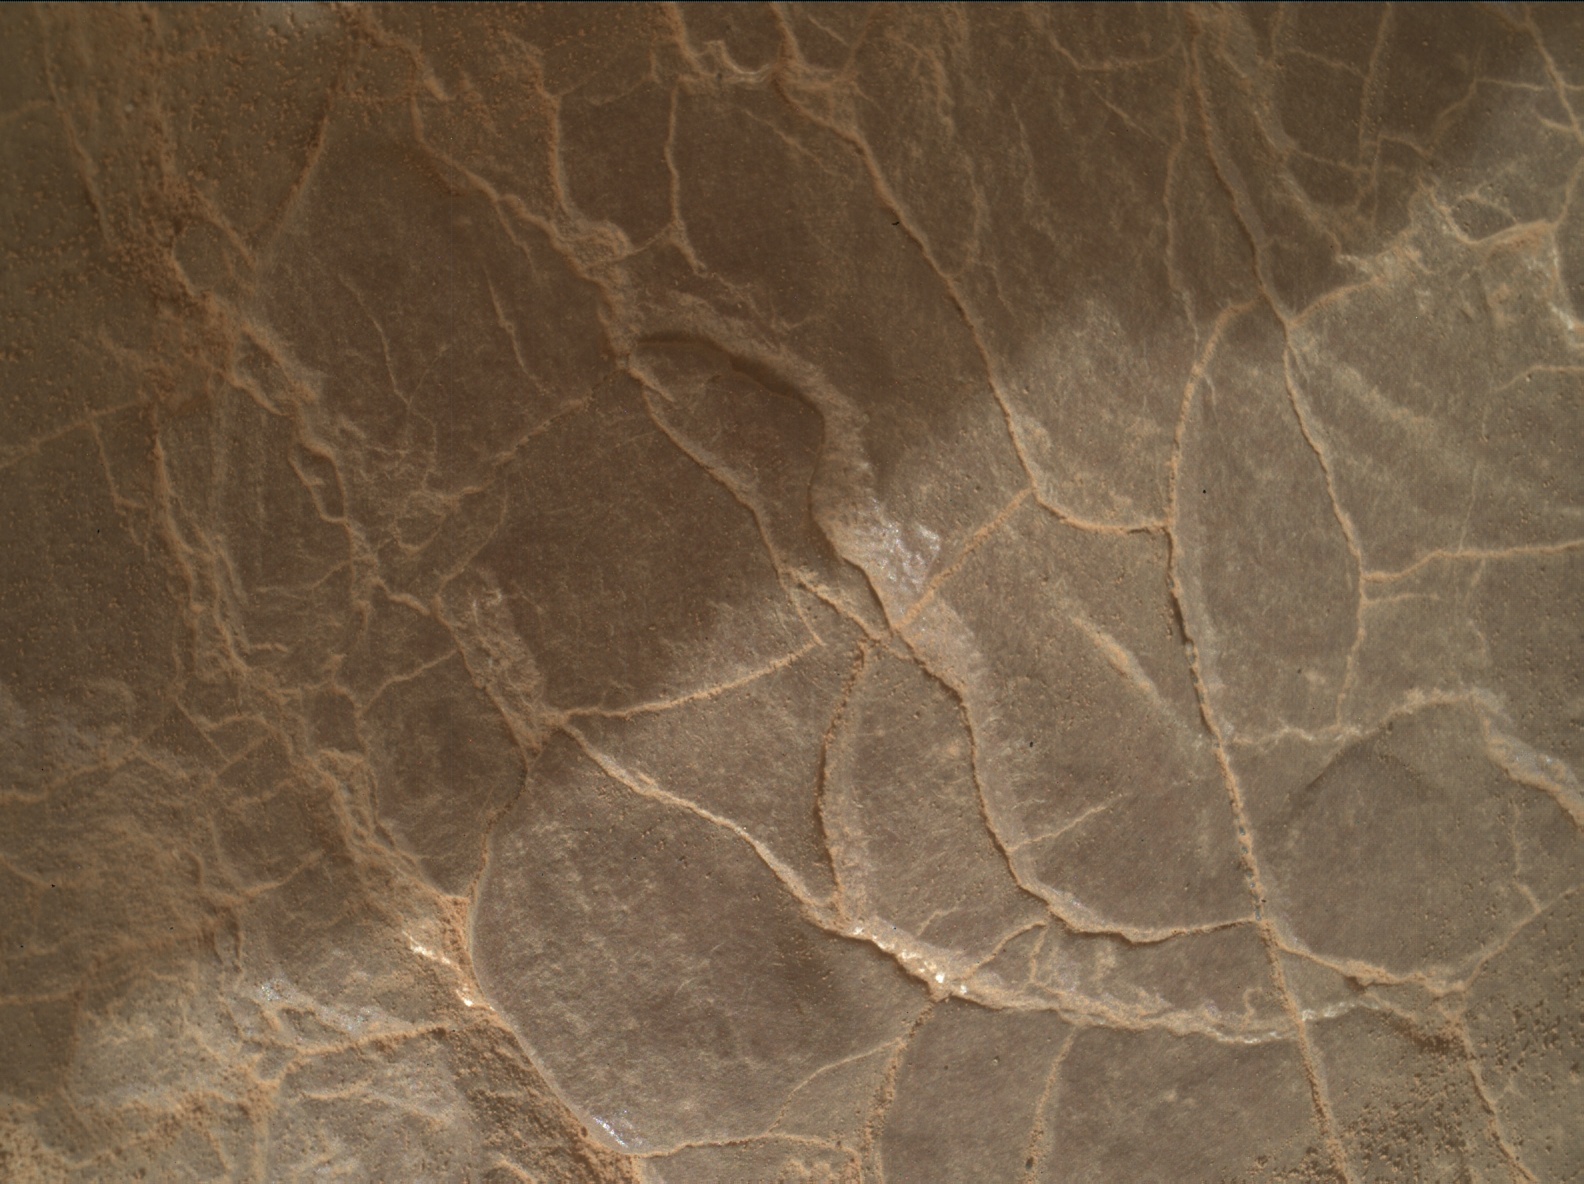 Nasa's Mars rover Curiosity acquired this image using its Mars Hand Lens Imager (MAHLI) on Sol 2949